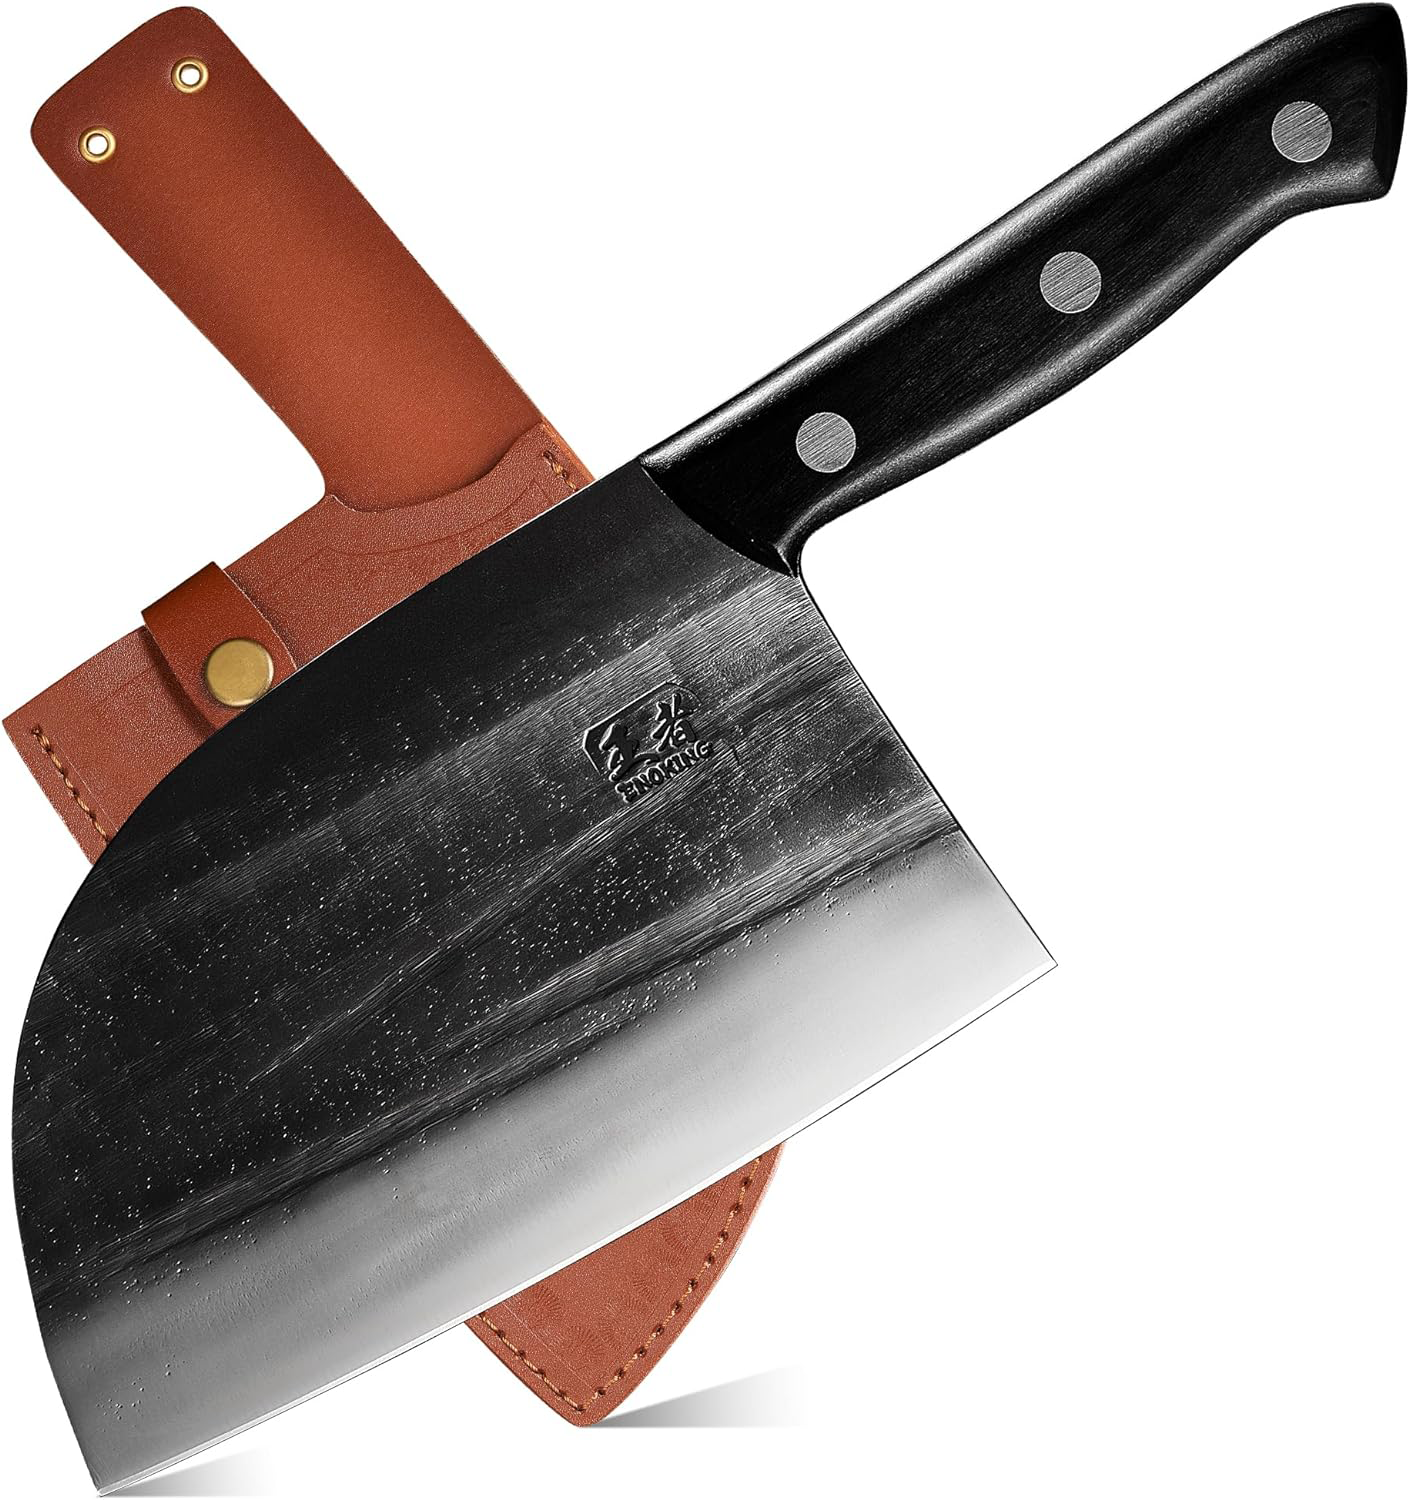 KD Serbian Cleaver Knife with Leather Sheath: 6.7 Inch Butcher Knife